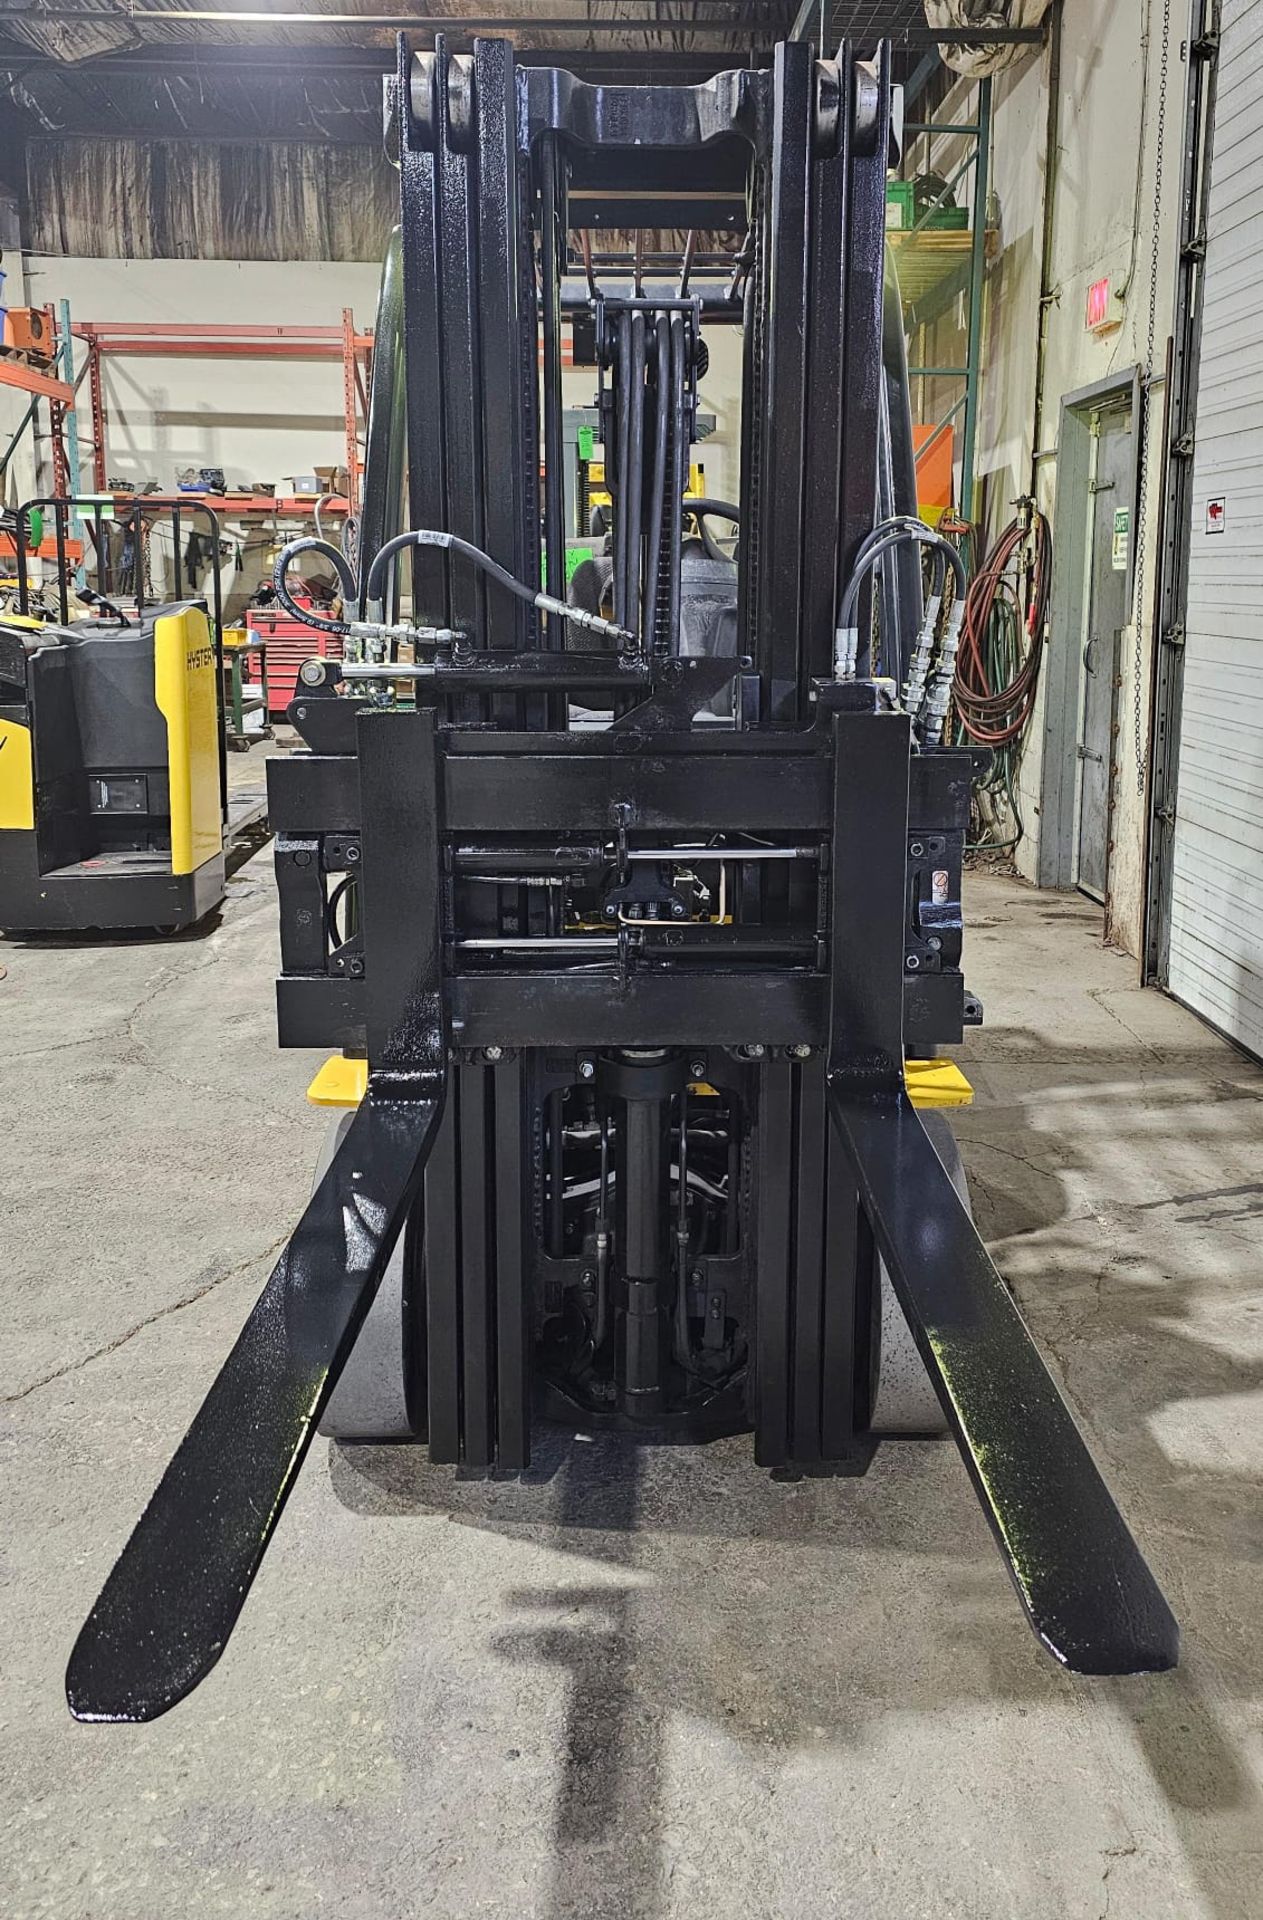 2016 Yale 5,000lbs Capacity LPG (Propane) Forklift with sideshift & Fork Positioner with 3-stage - Image 5 of 5